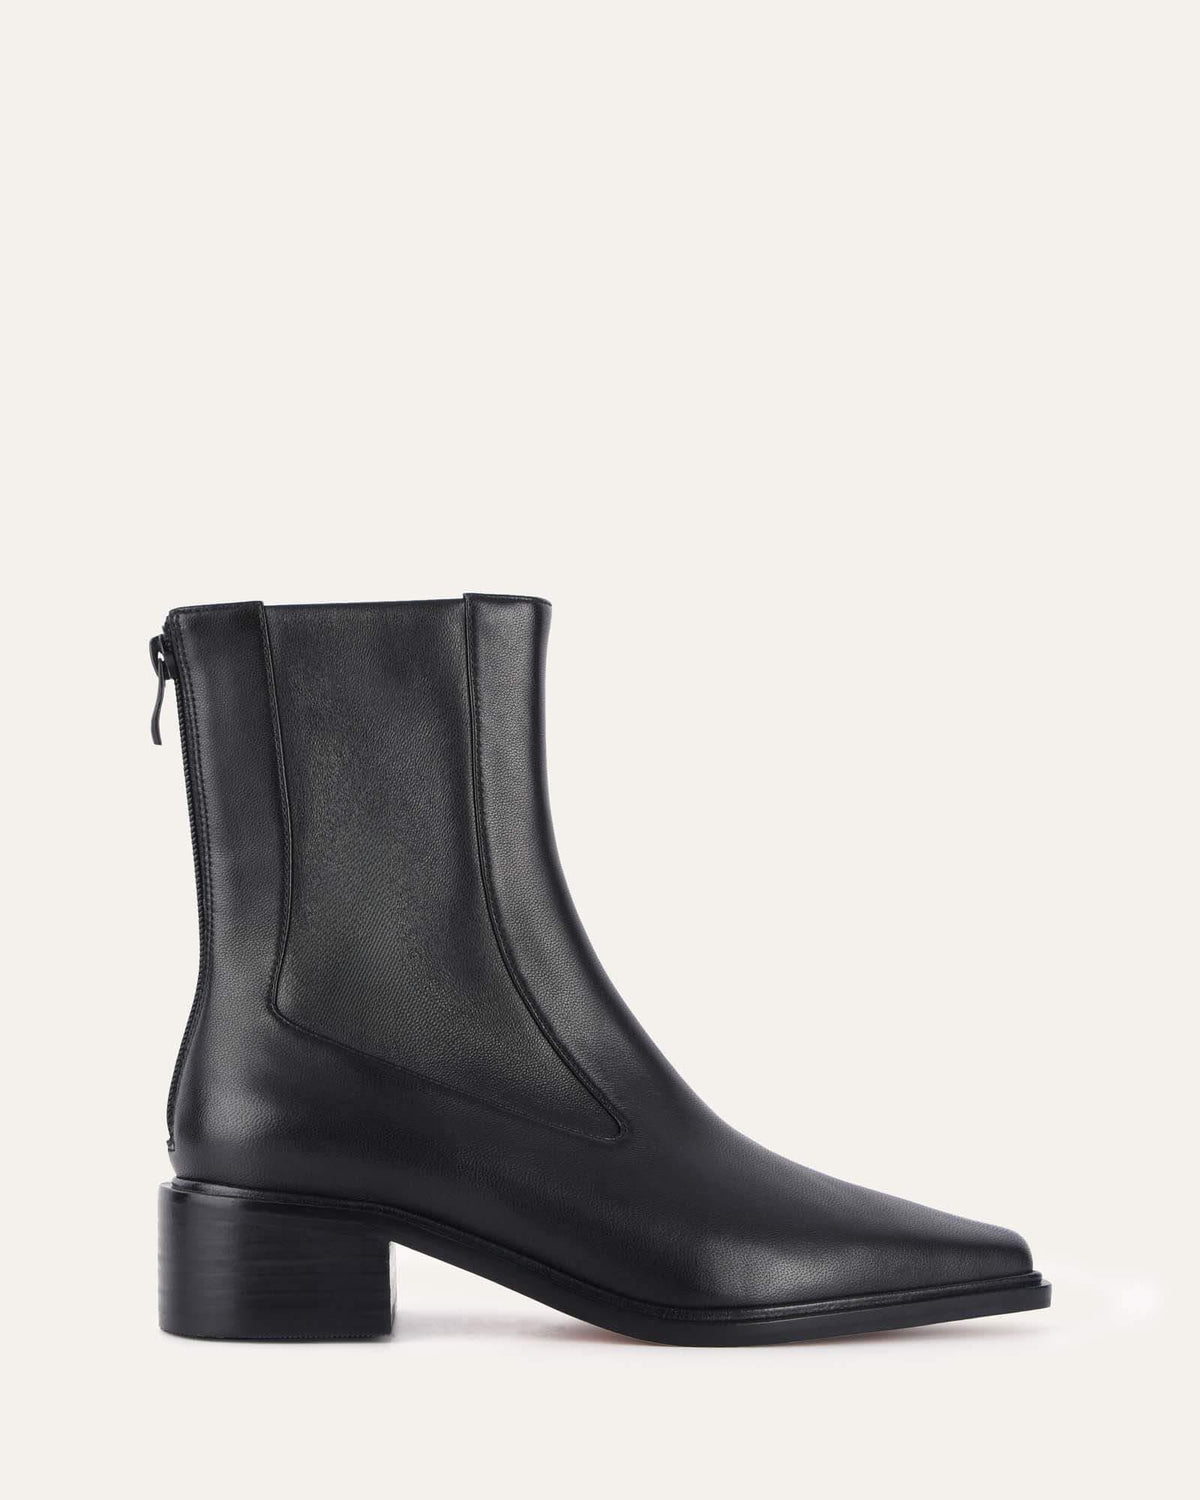 OLYMPIA FLAT ANKLE BOOTS BLACK LEATHER